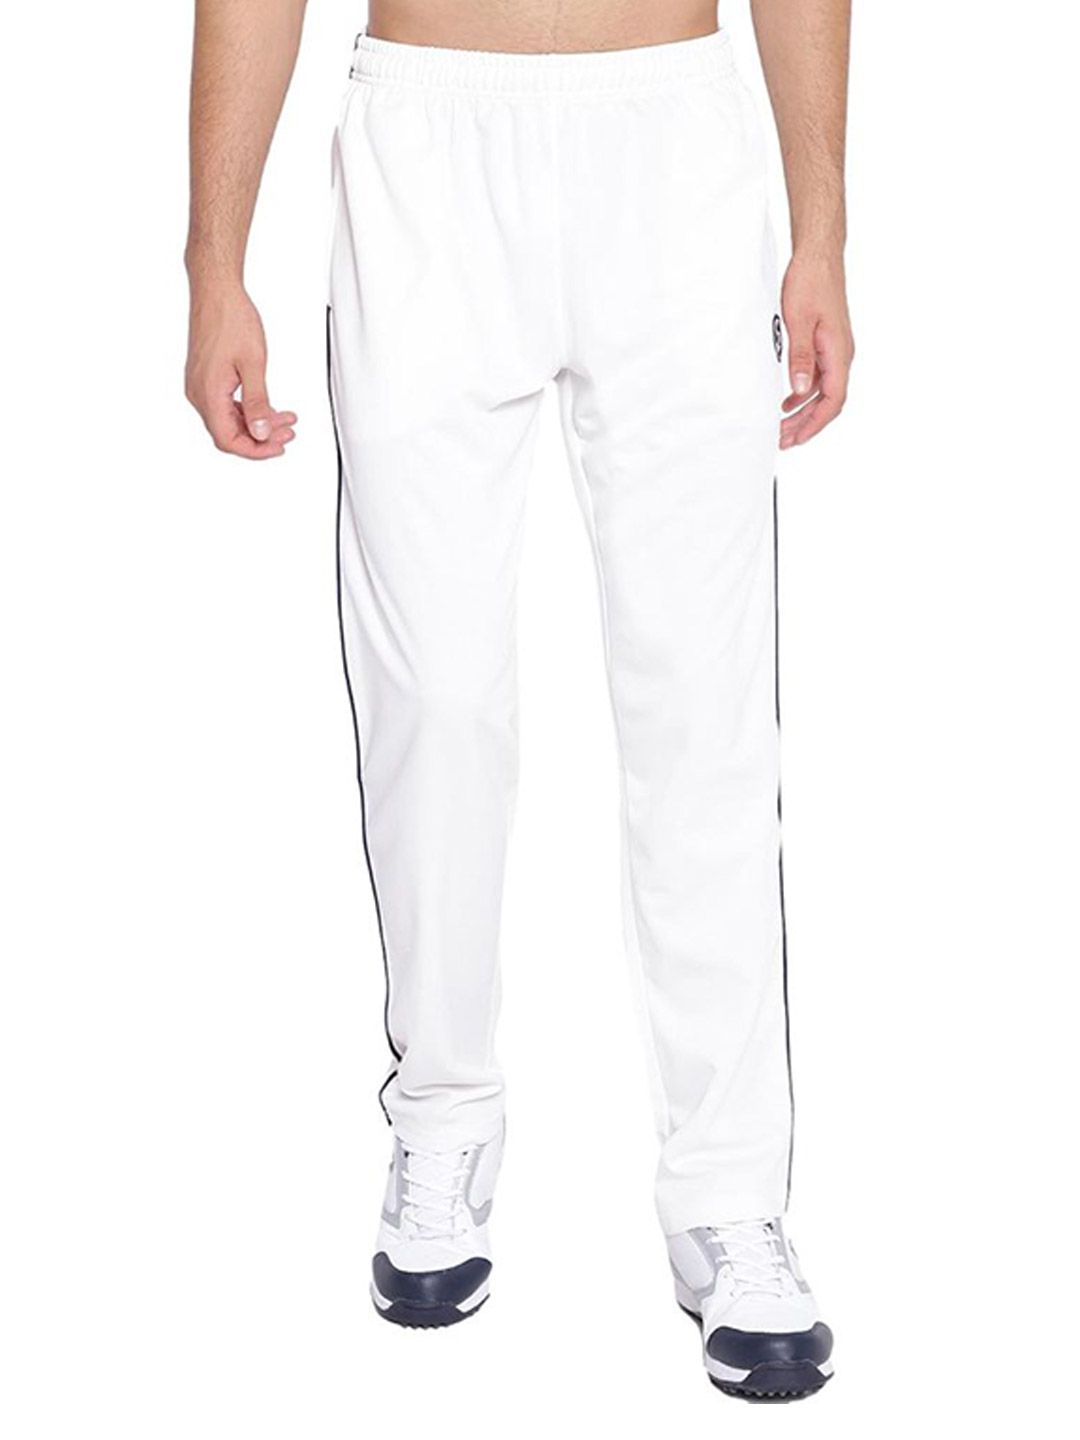 ROYALEWAY Lower Track Pant White RWM5001, Age: Young at Rs 699/piece in Wai